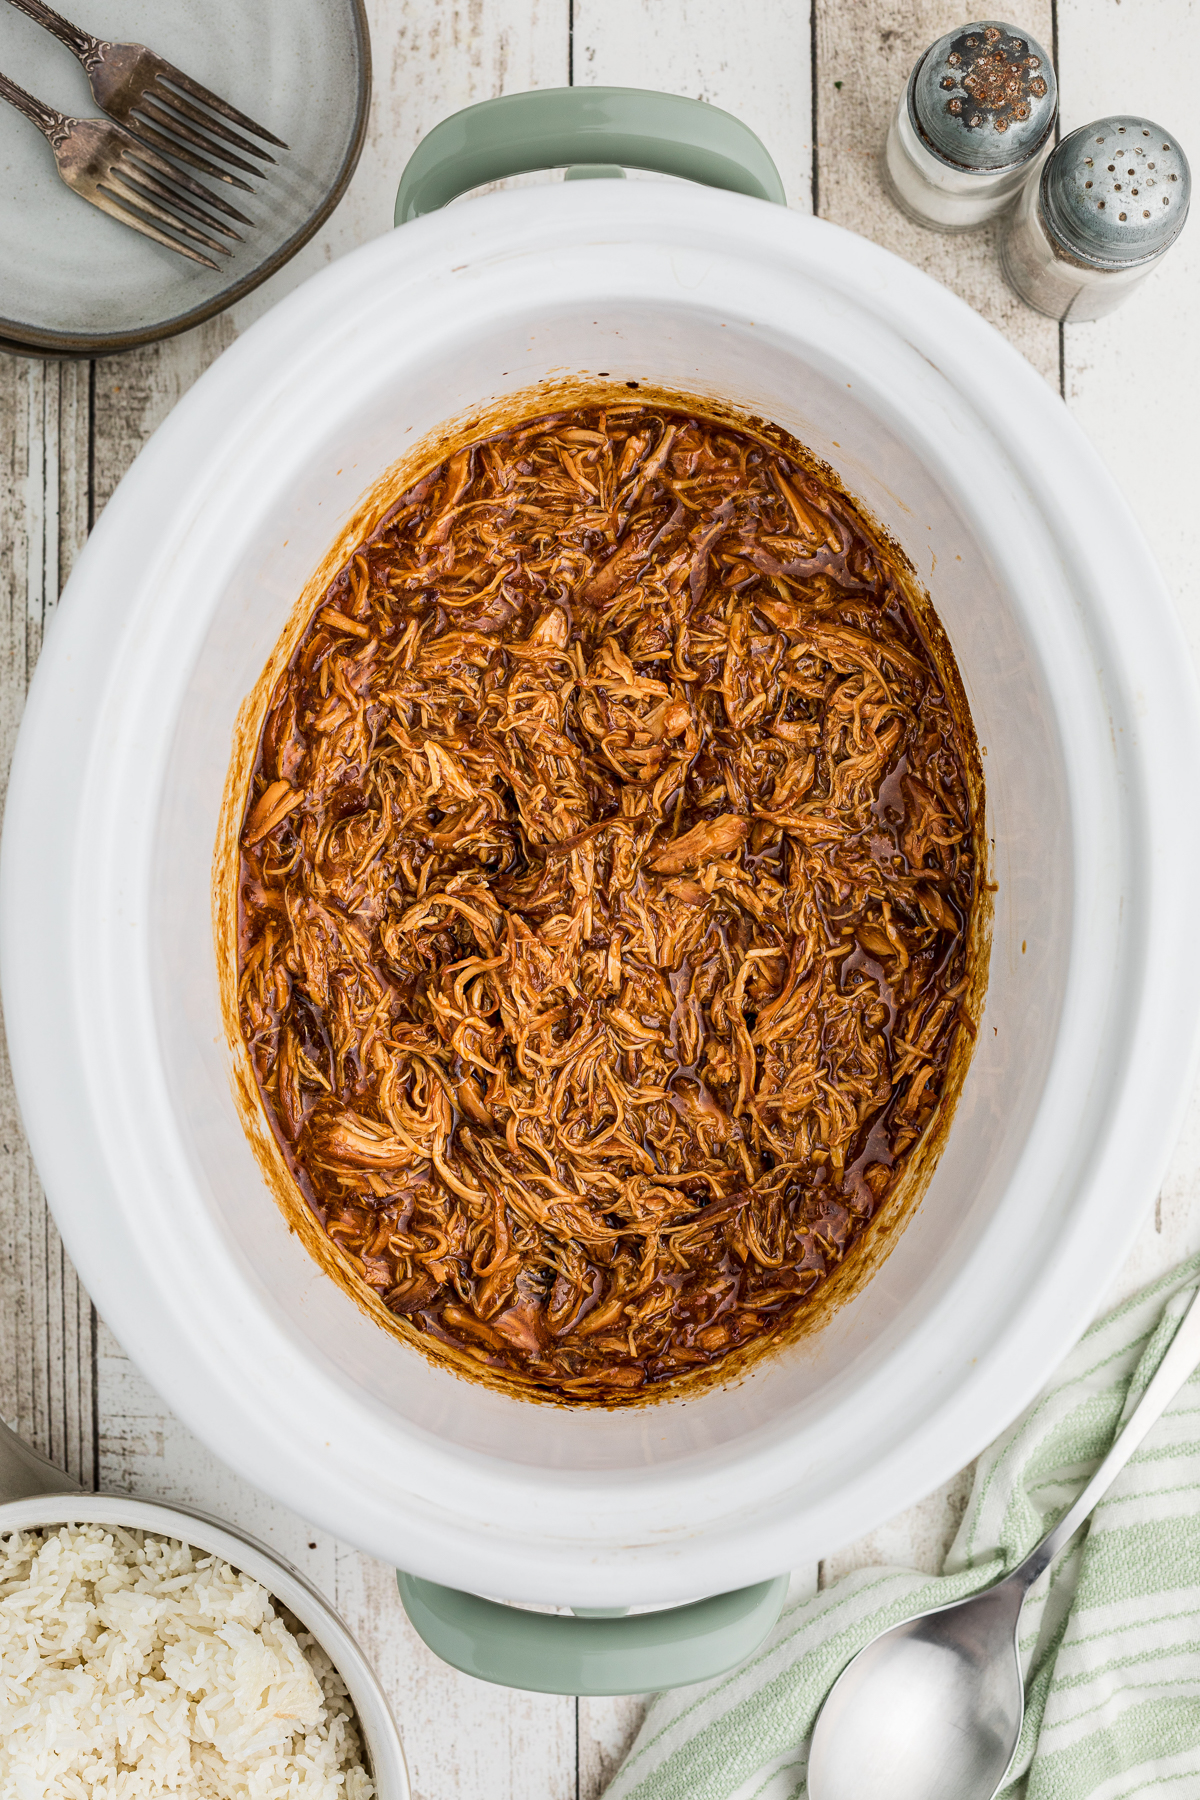 Shredded apricot chicken in a slow cooker.